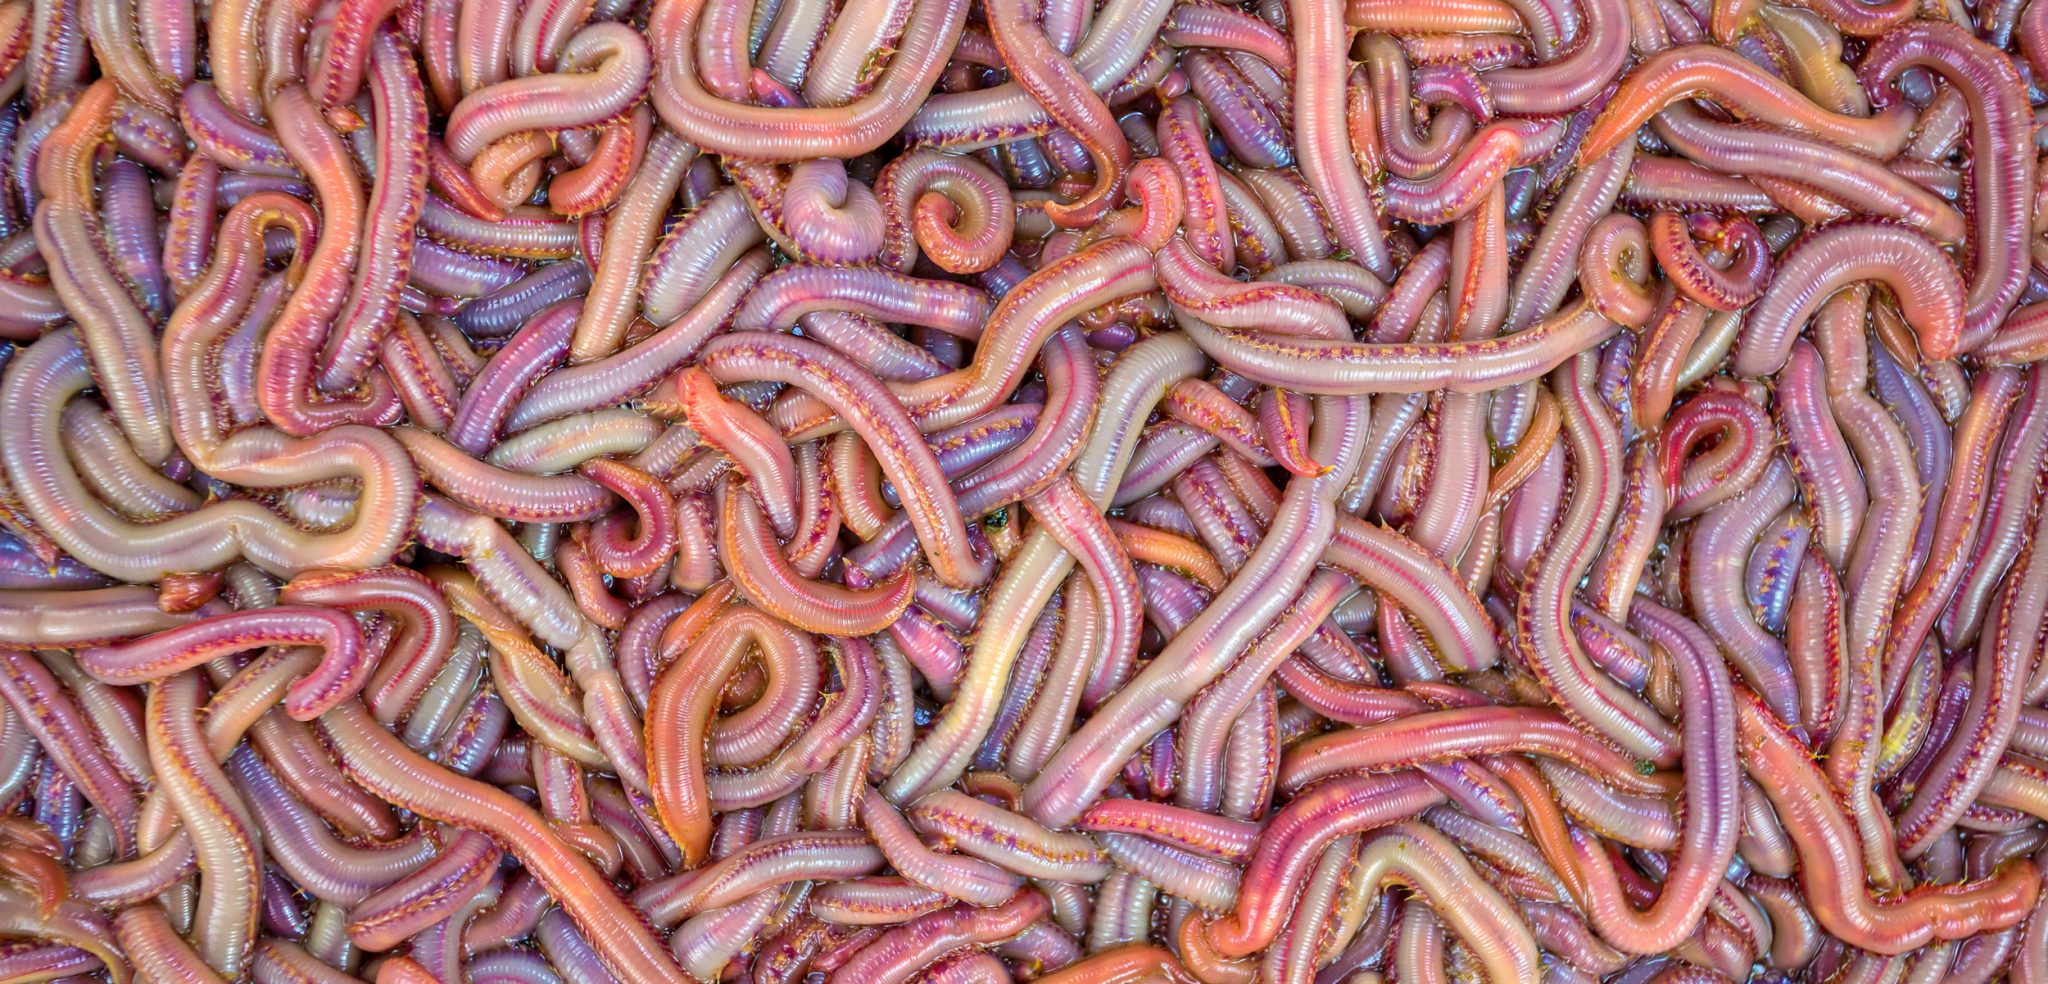 download bloodworms for sale